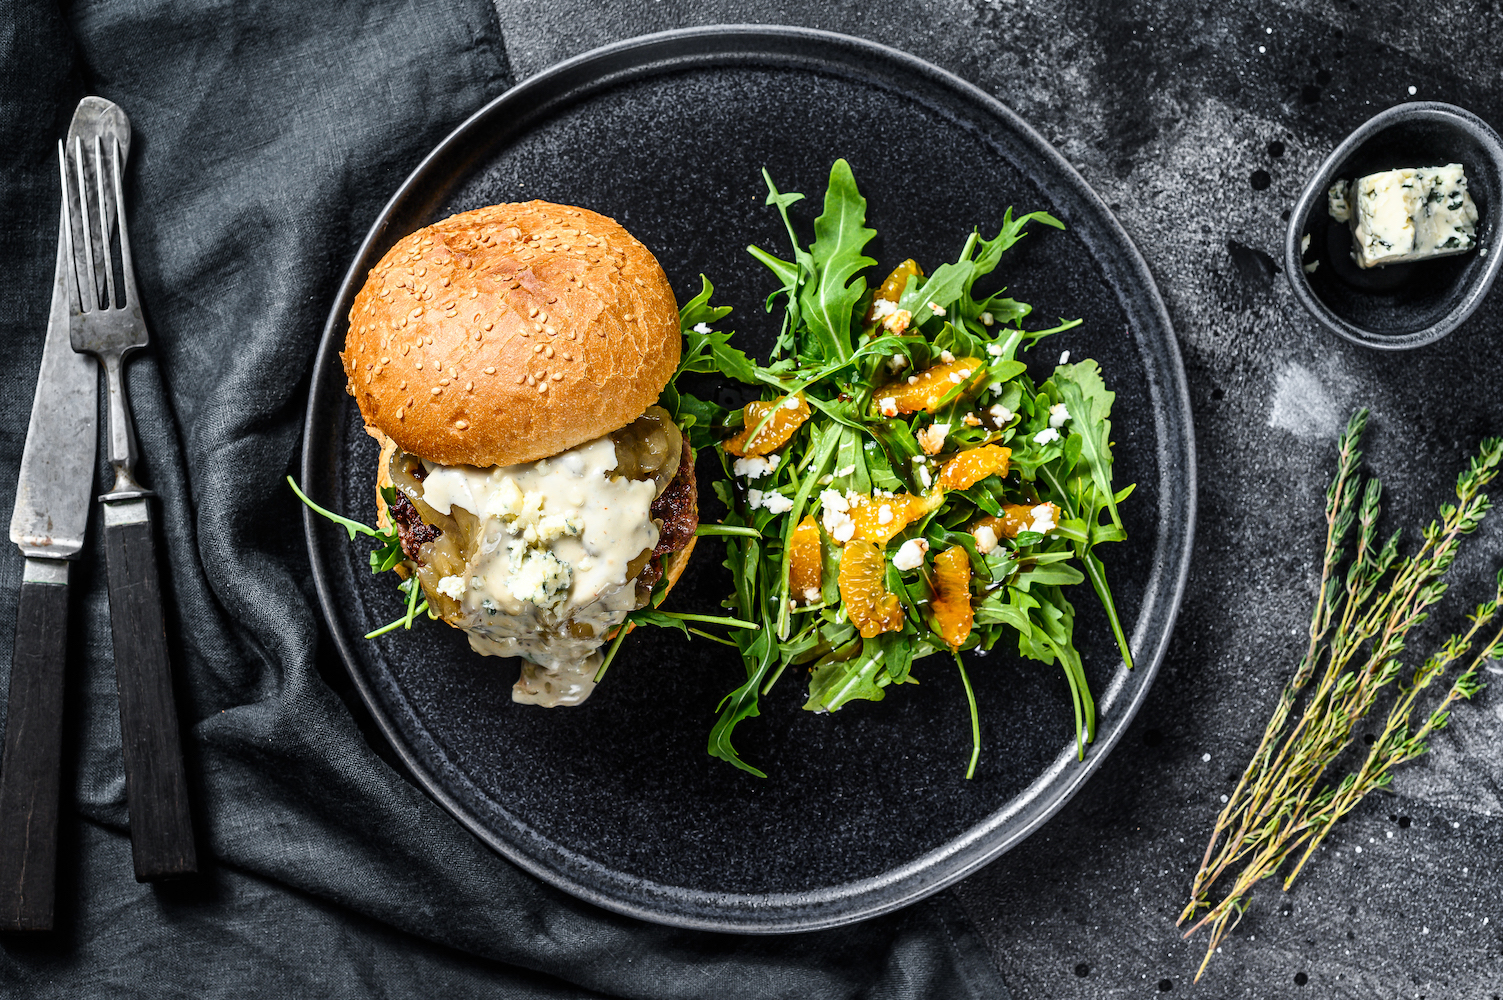 Burgers with blue cheese, bacon, marbled beef and onion marmalade, a side dish of salad with arugula and oranges. Black background. Top view 